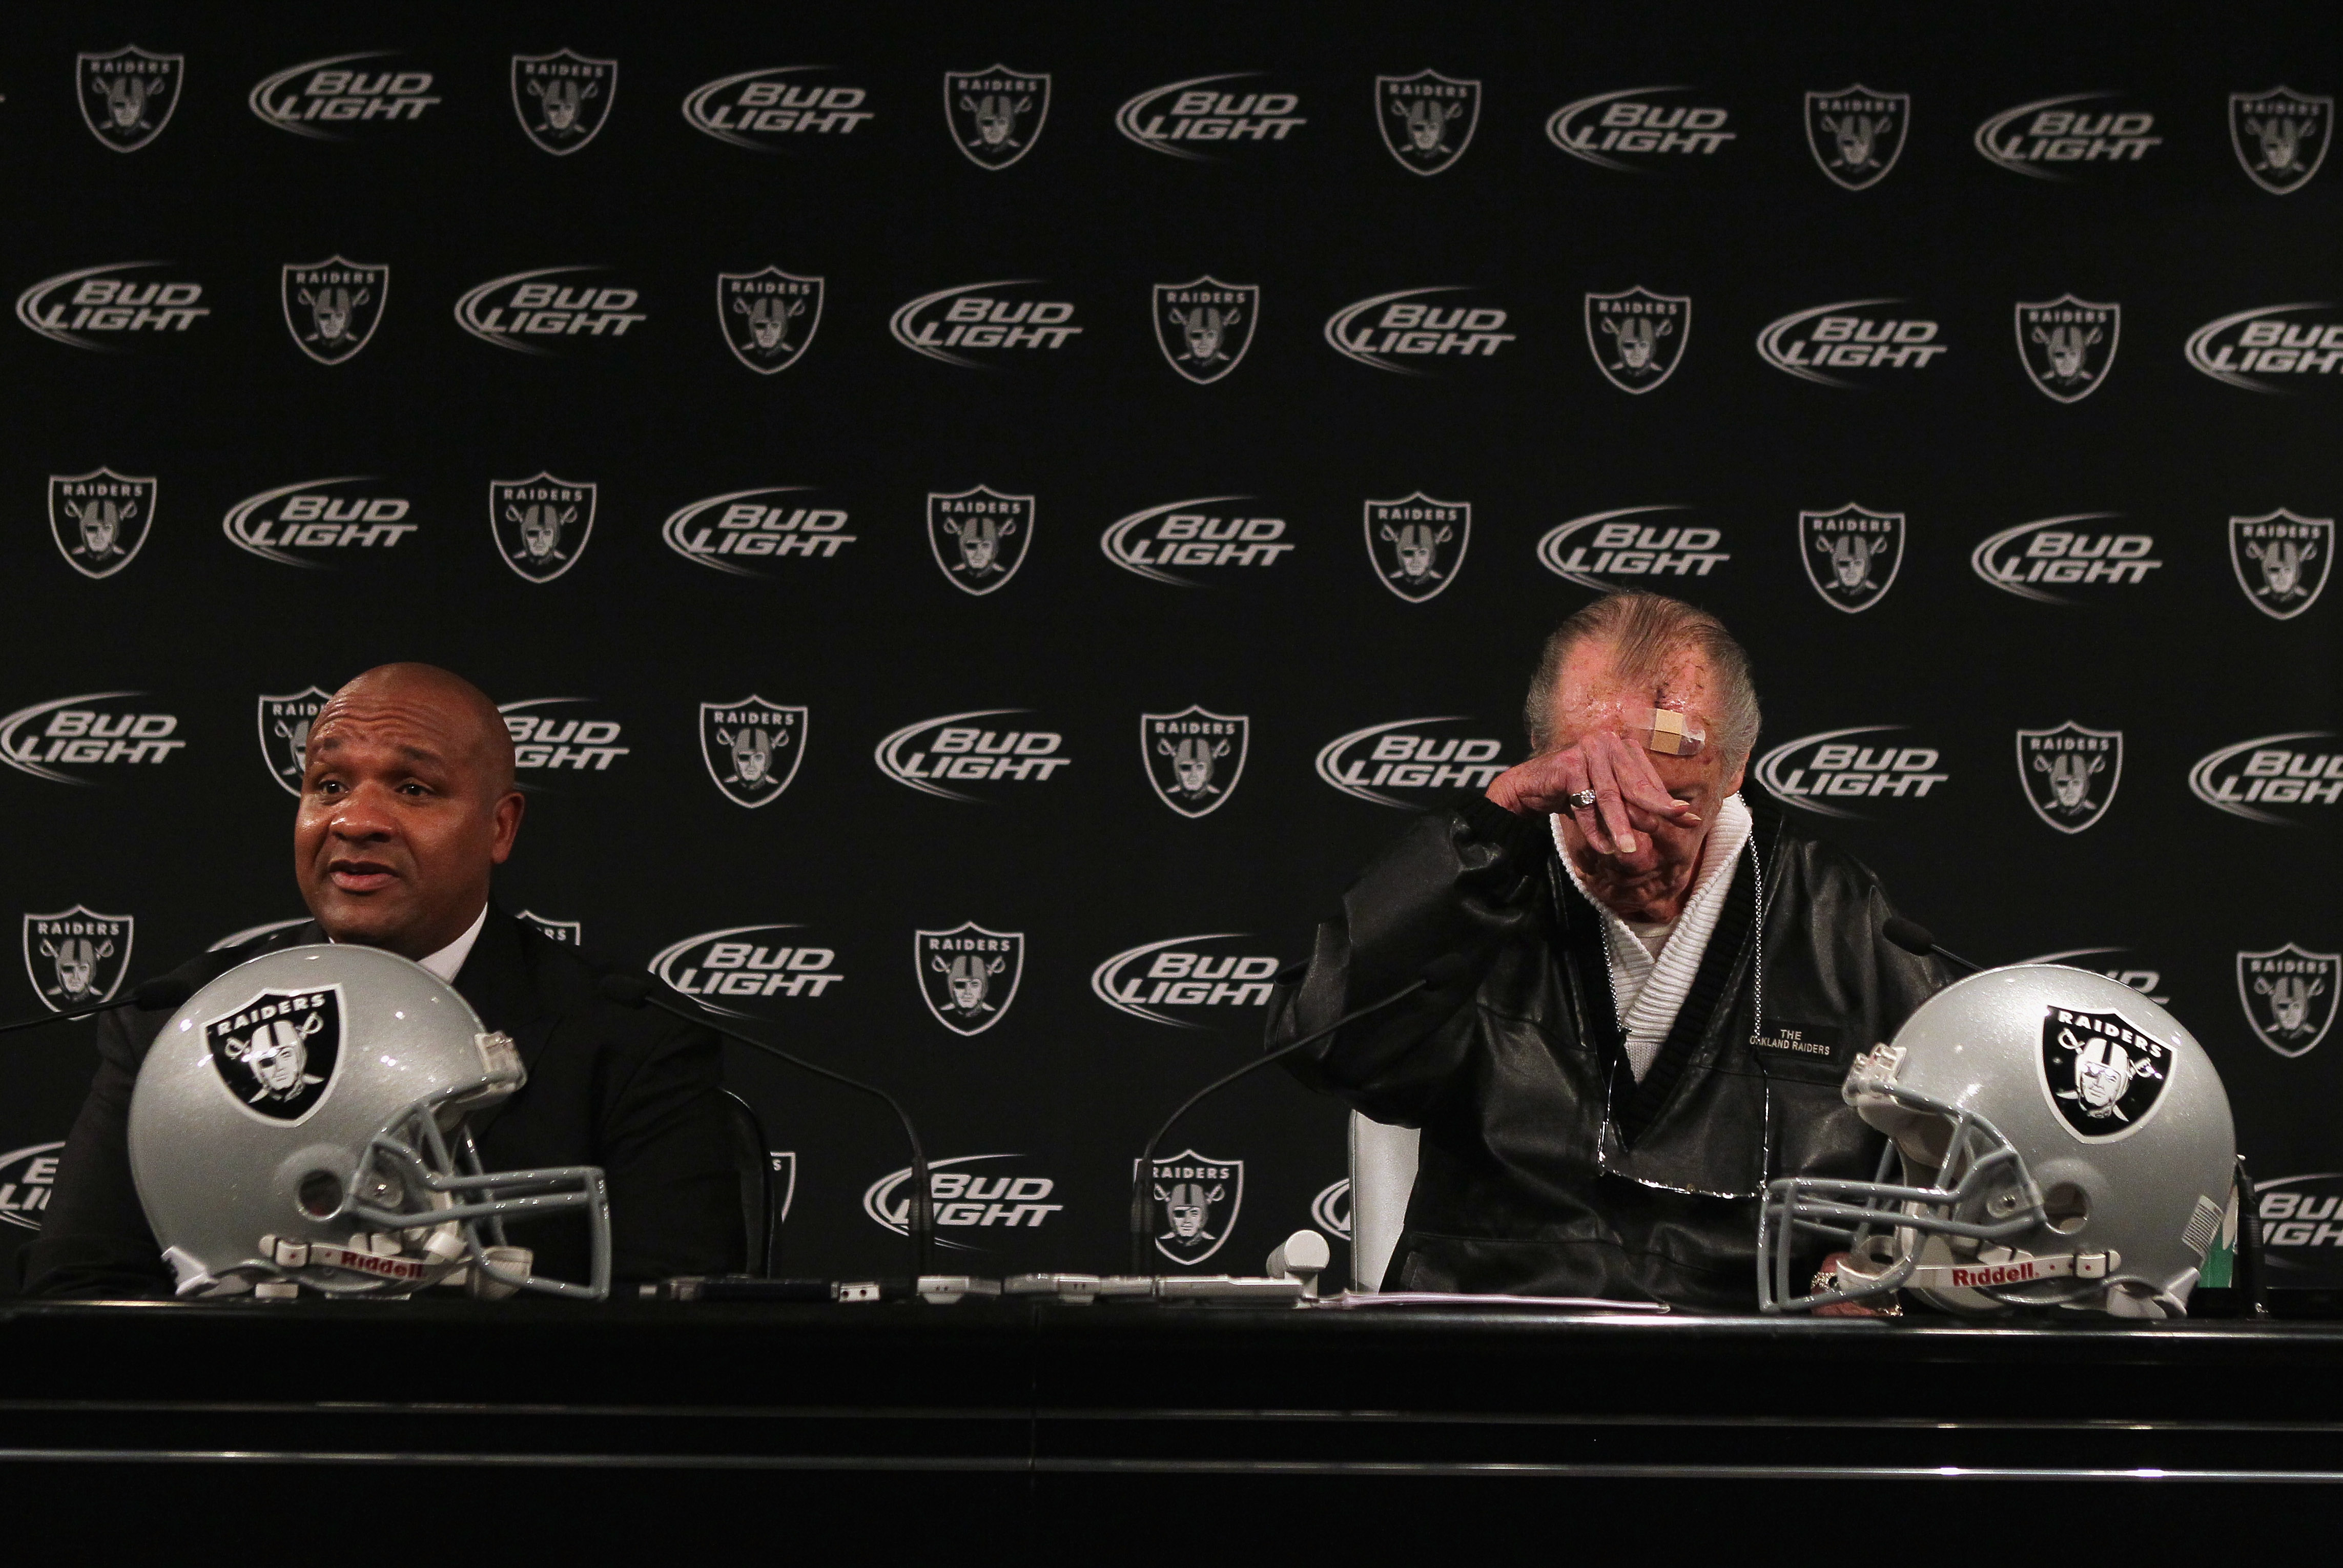 ALAMEDA, CA - JANUARY 18:  New Oakland Raiders coach Hue Jackson (L) speaks to reporters as  Raiders owner Al Davis rubs his head during a press conference on January 18, 2011 in Alameda, California. Hue Jackson was introduced as the new coach of the Oakl